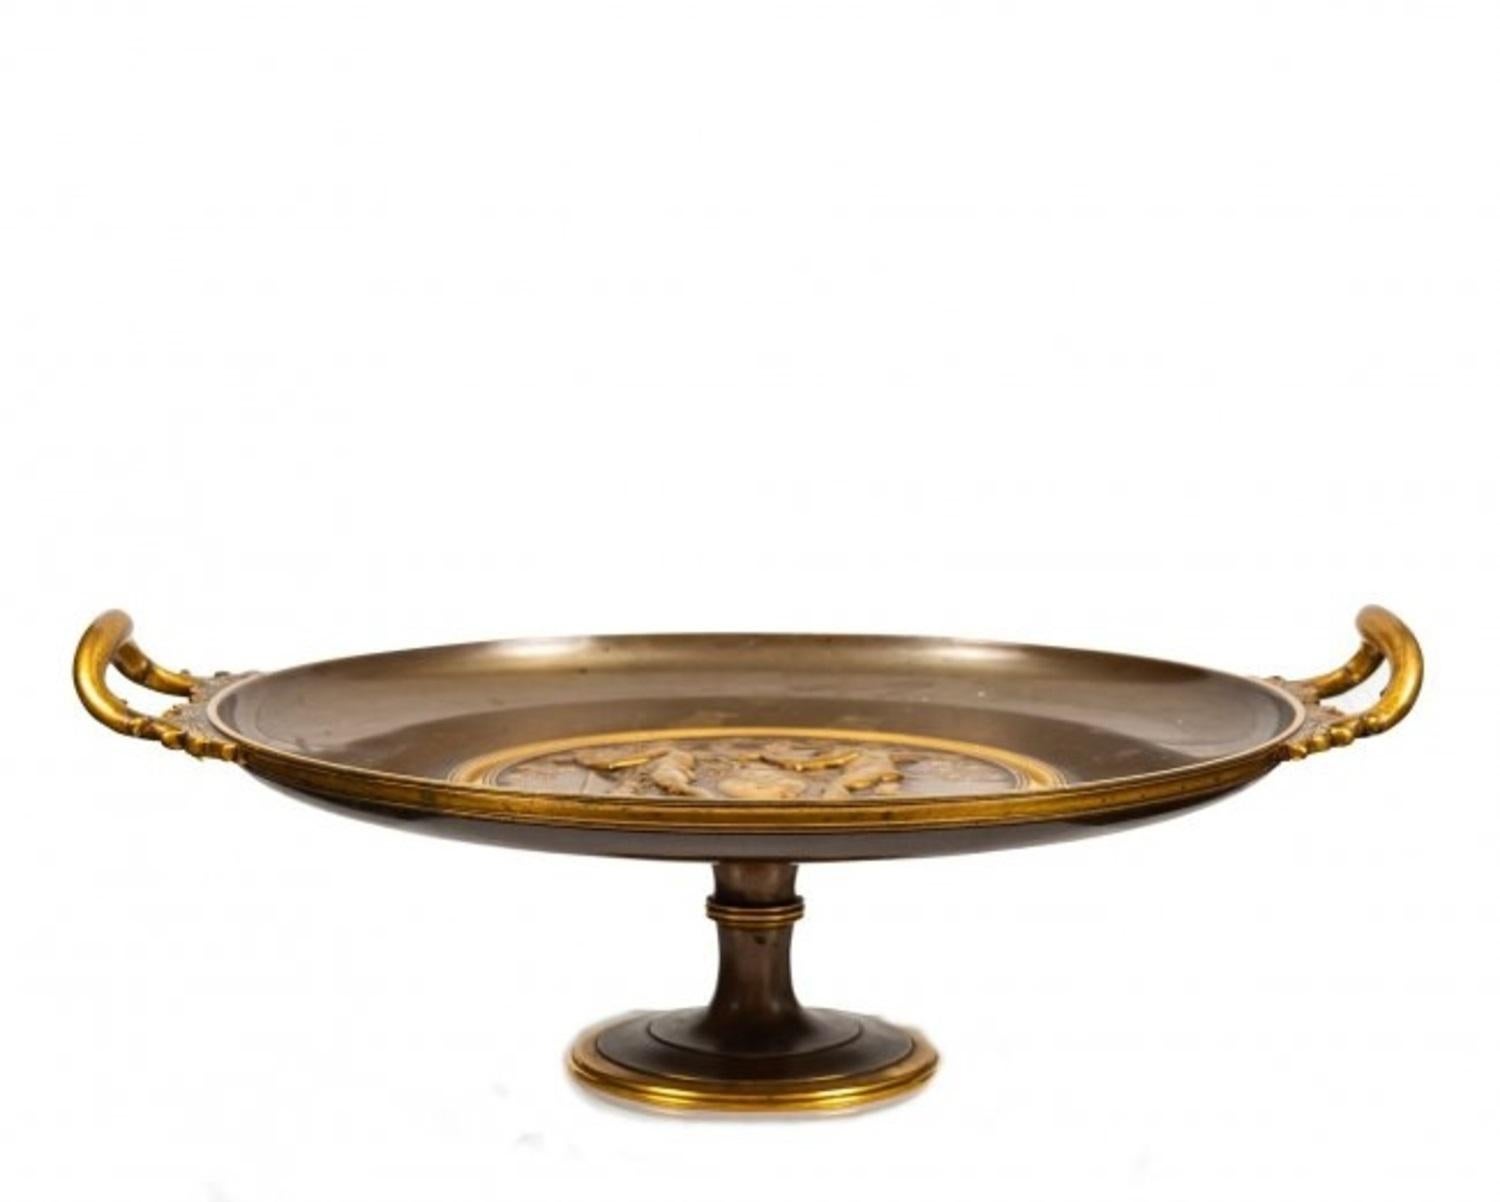 A fantastic Ferdinand Levillain Tazza (1837-1905),
Paris, circa 1890.
In the celebrated neo-Grec fasion, the tazza in gilt and patinated bronze, signed F. Levillain.
Height 9 in.;
Diameter 16 in.
22.8 cm; 40.6 cm
catalogue note:
The source of